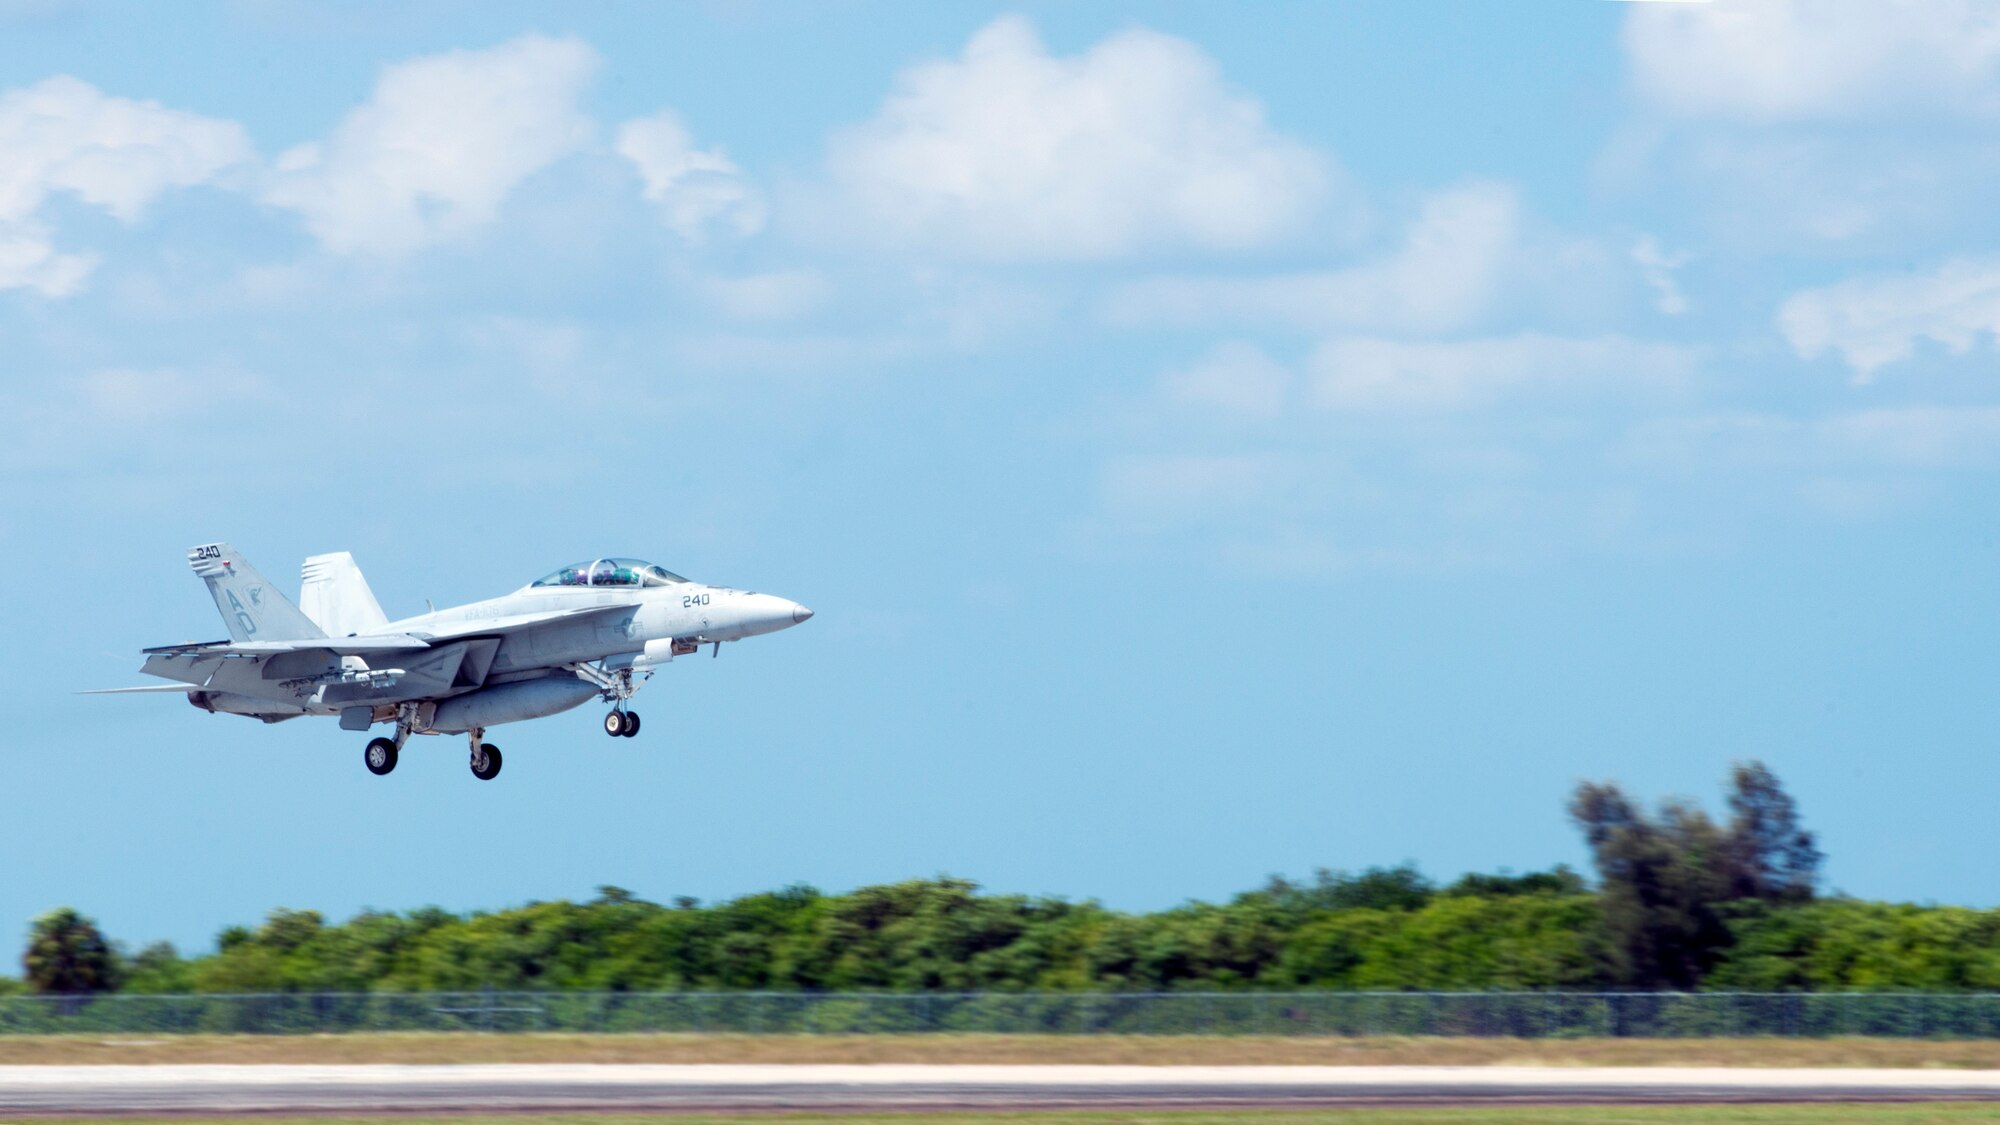 A U.S. Navy Strike Fighter Squadron 106 F/A-18F Super Hornet aircraft from Naval Air Station Oceania, Va., lands at MacDill Air Force Base, Fla., Oct. 1, 2019.